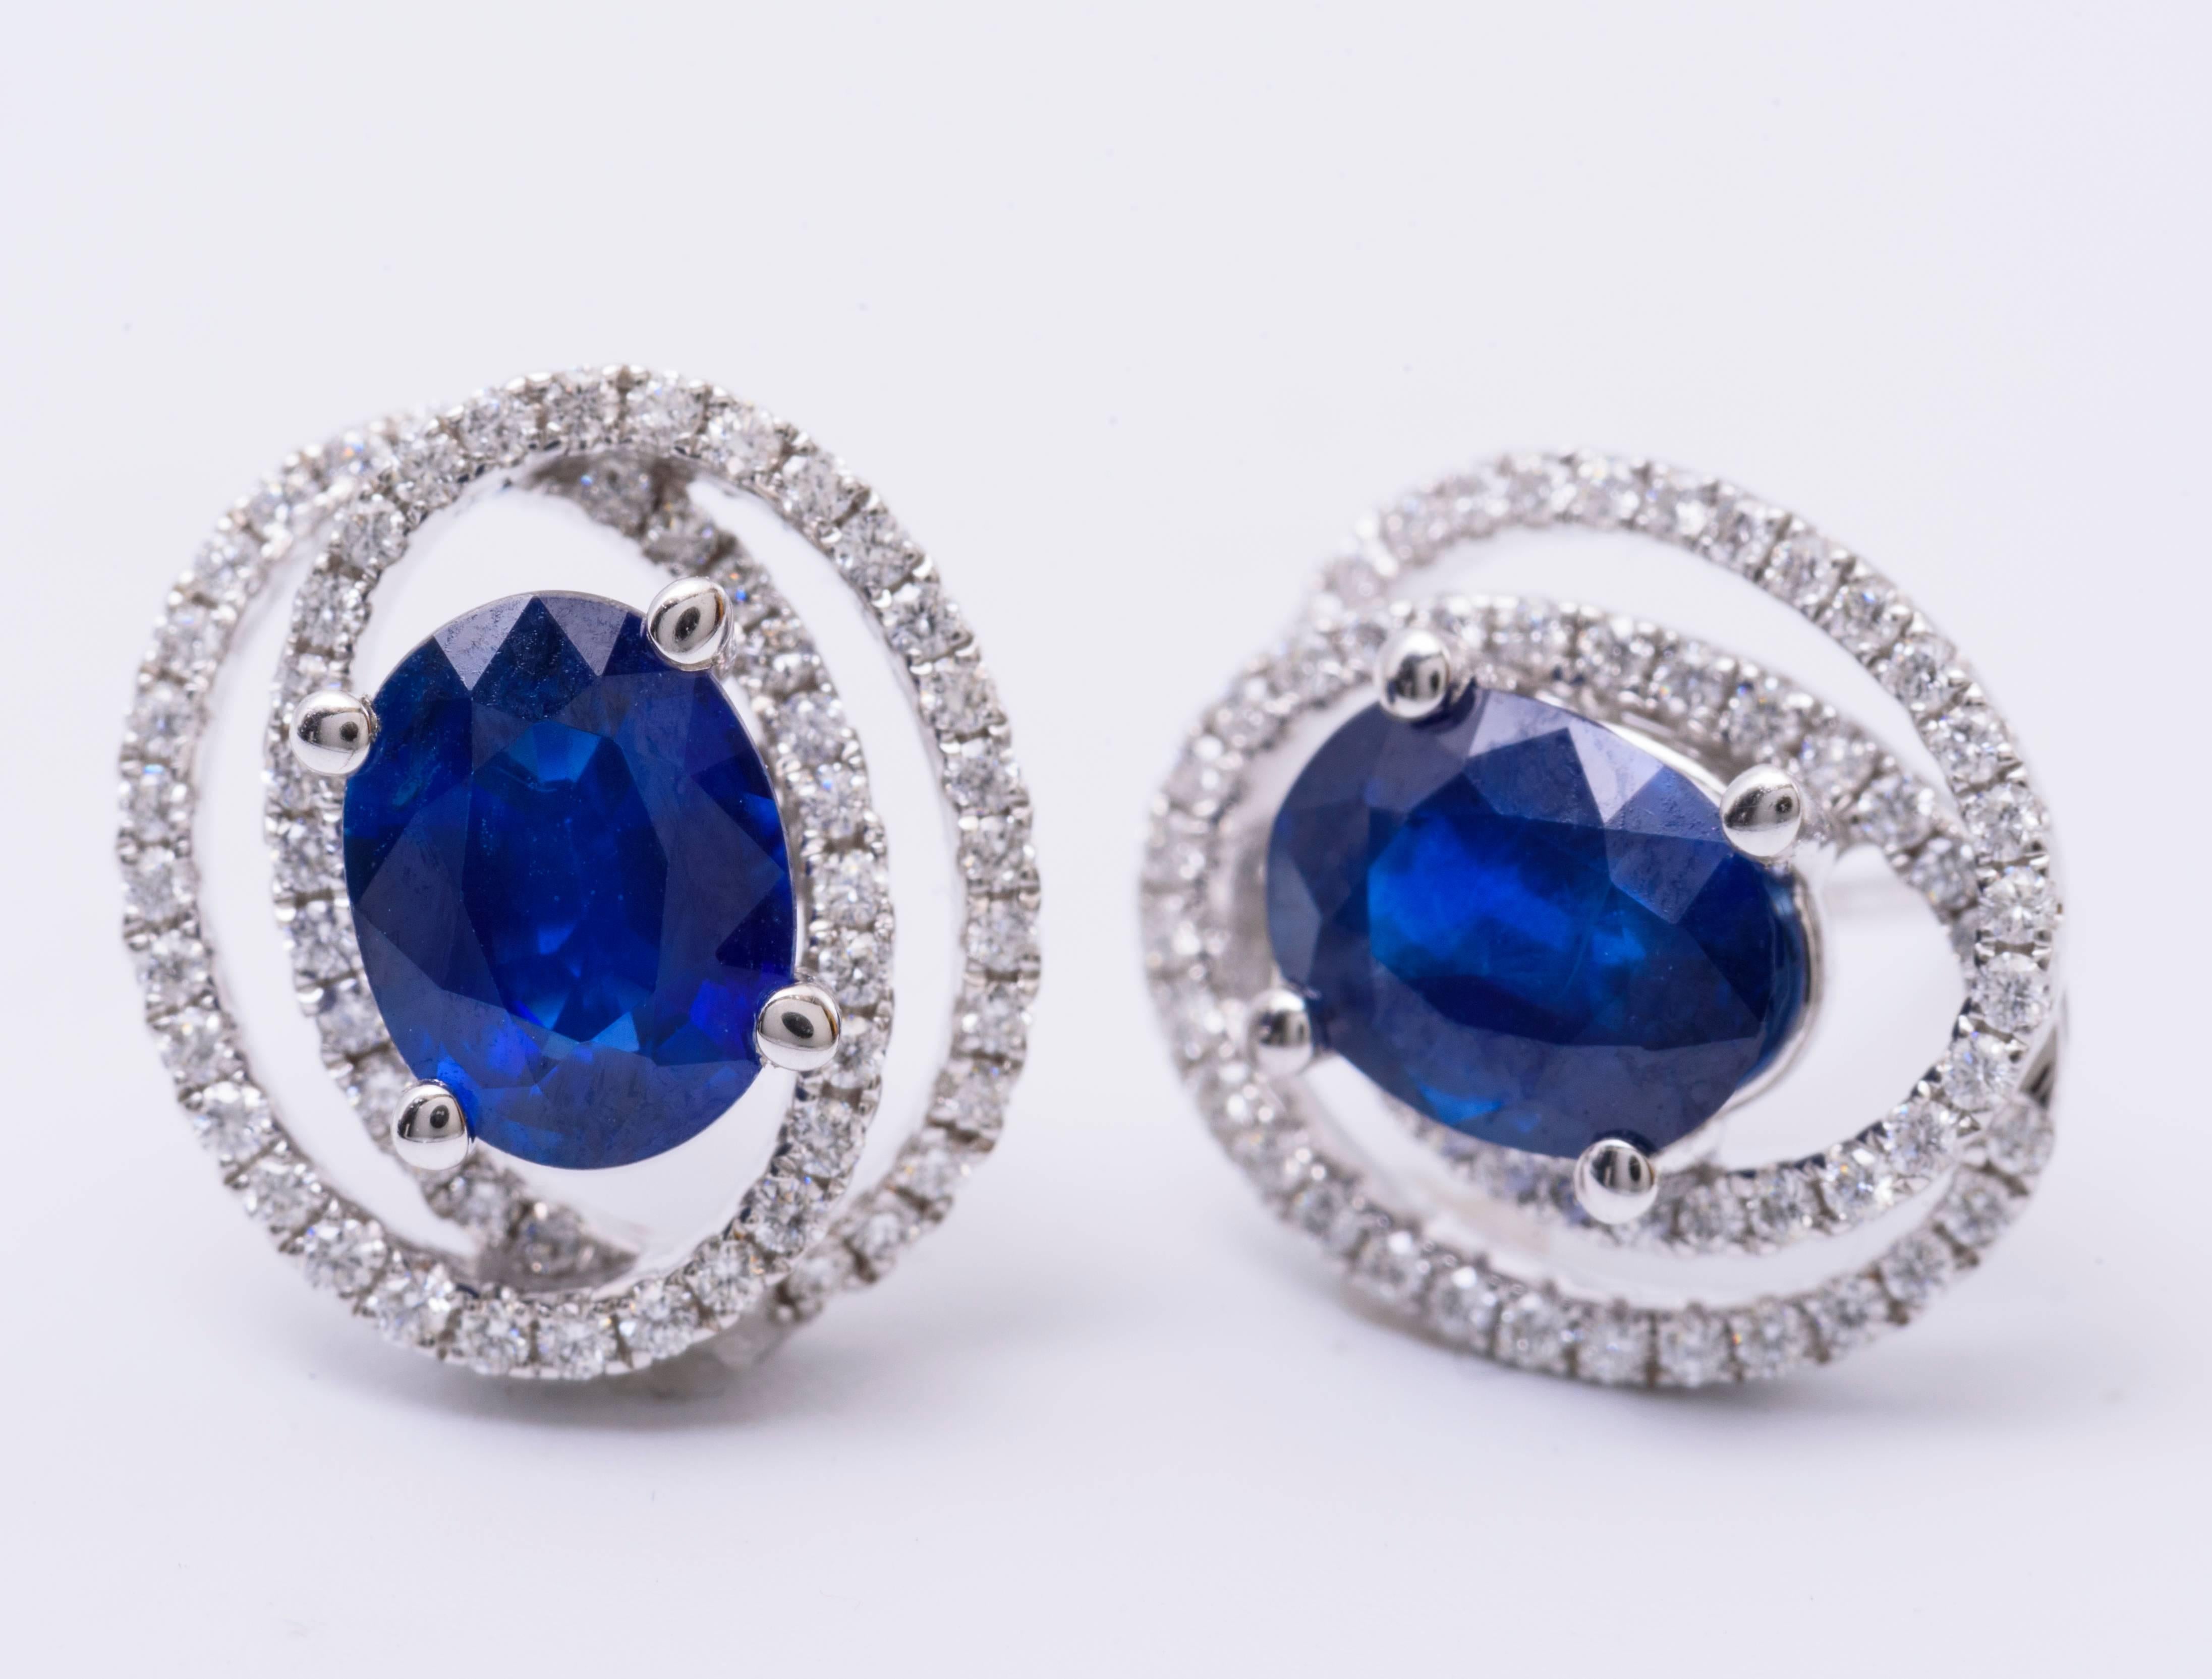 Contemporary Diamond and Sapphire Studs Earrings